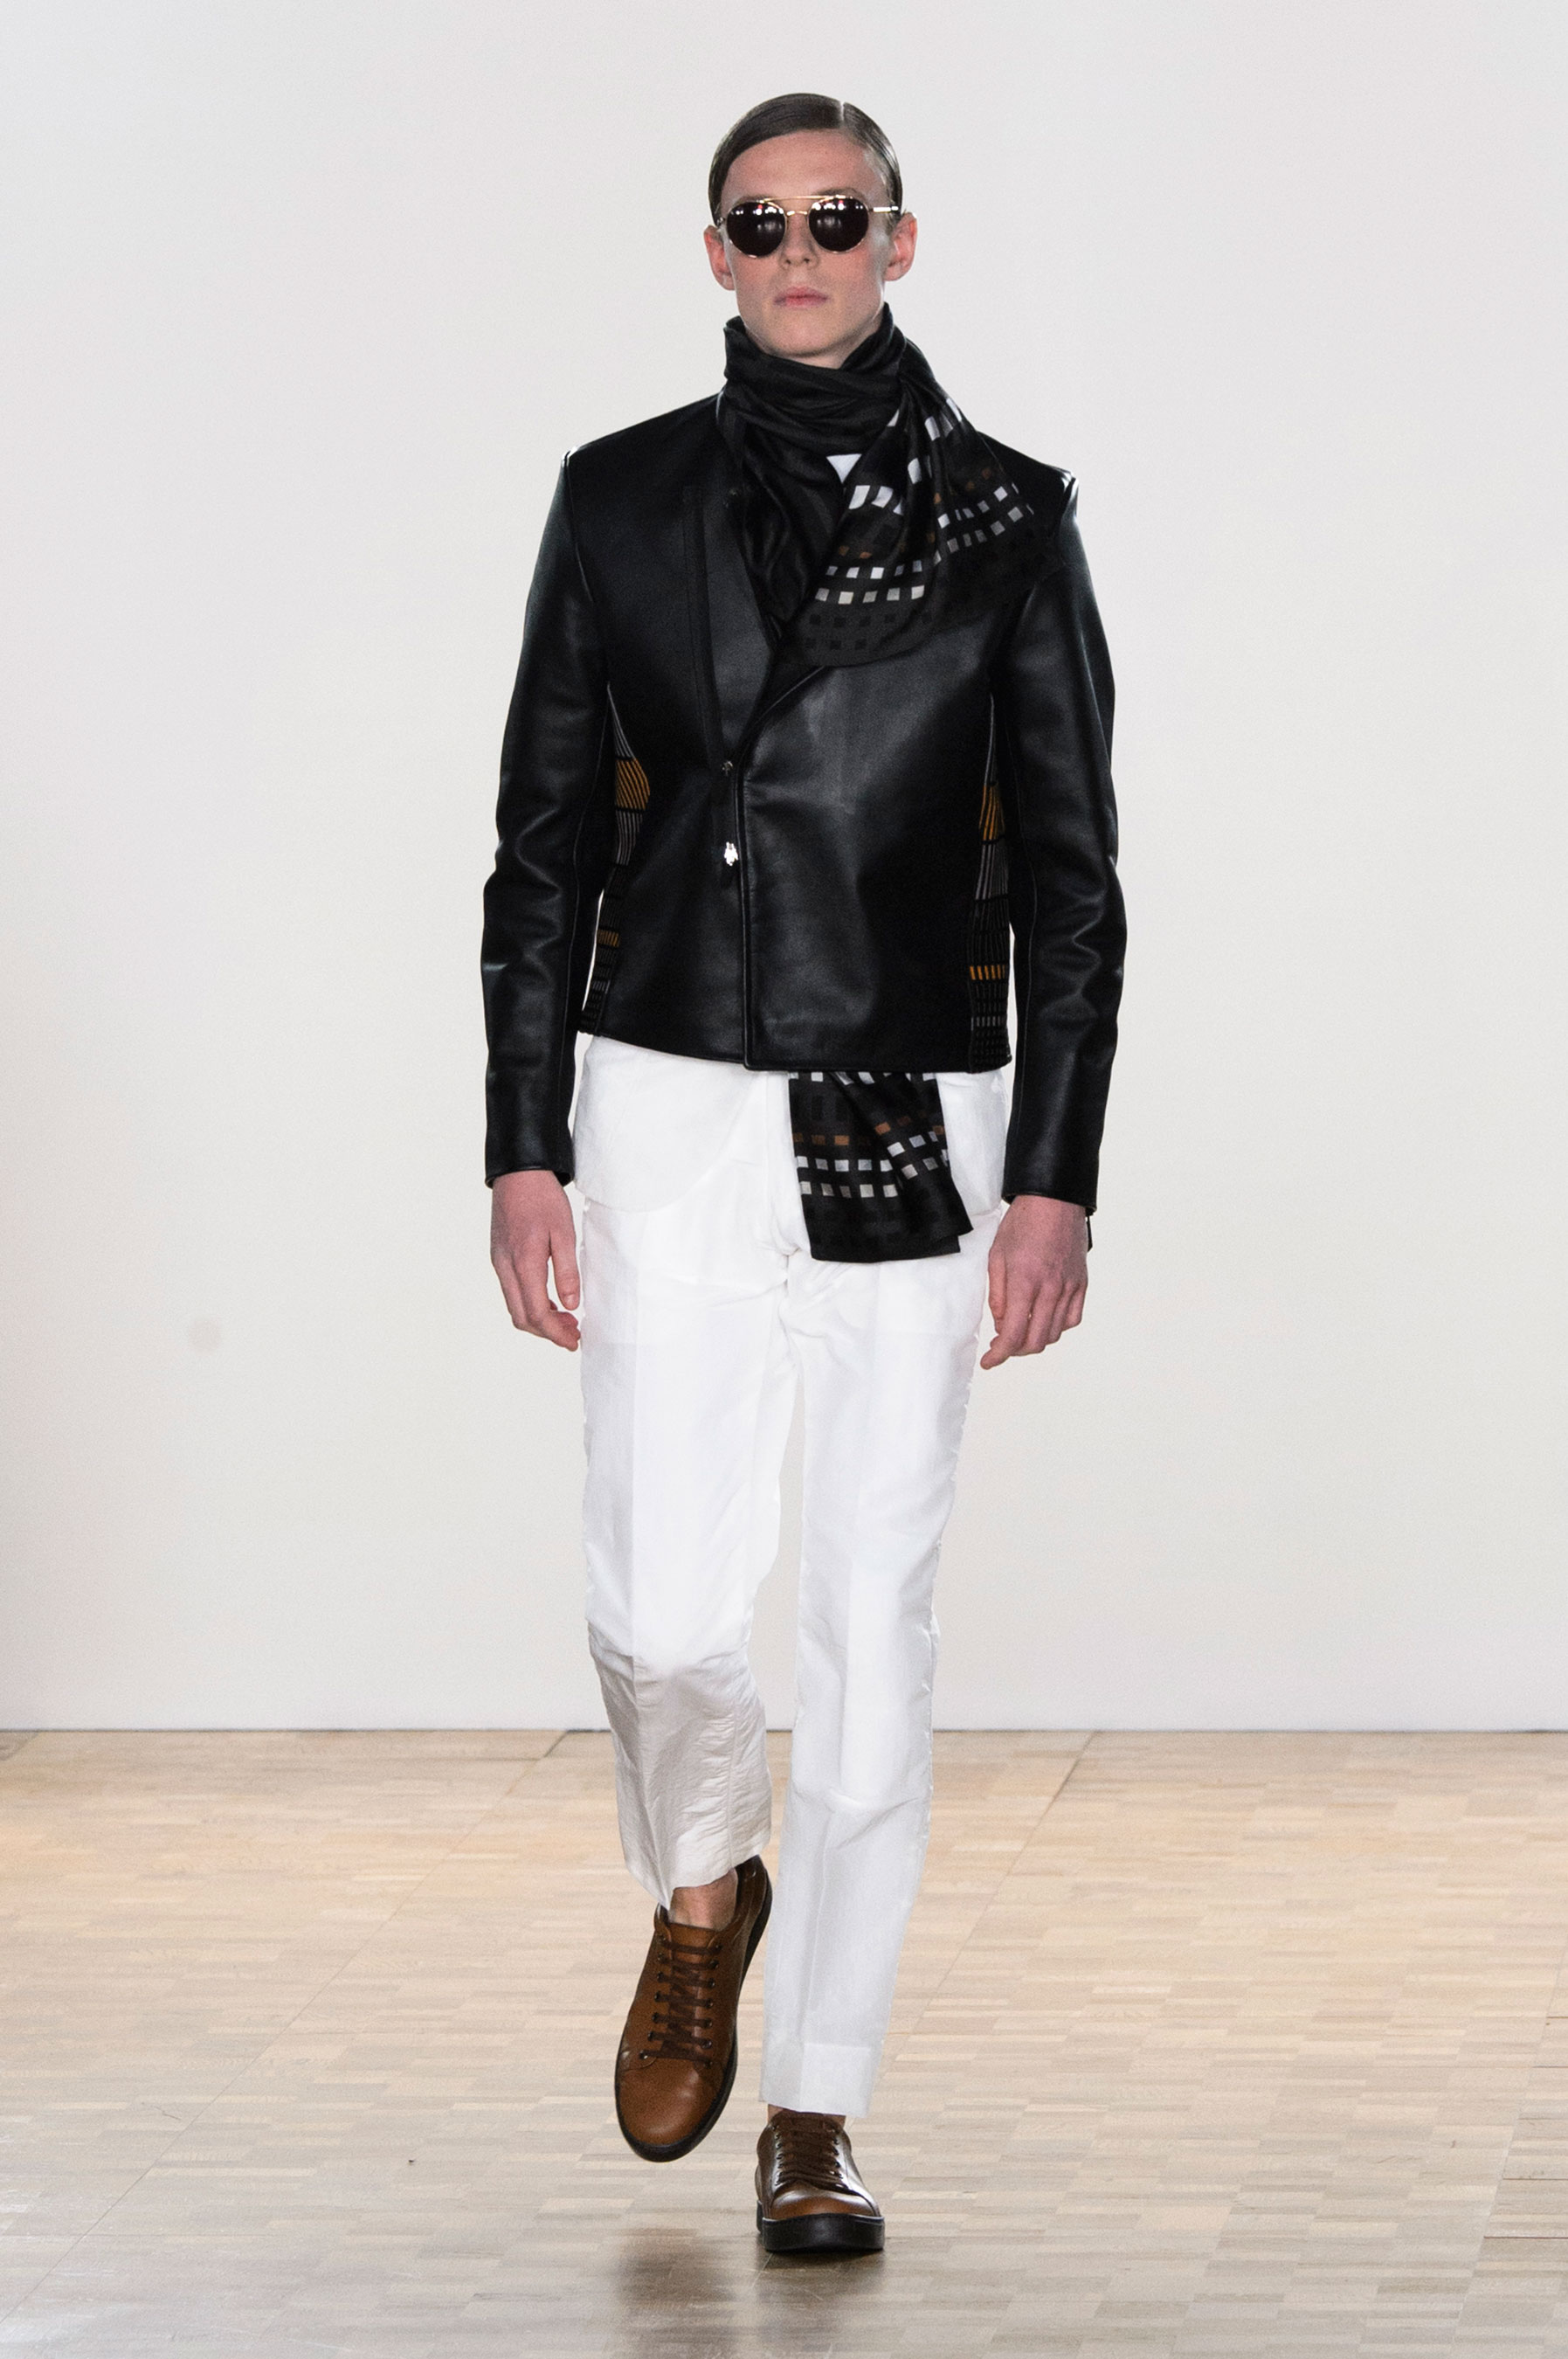 Hardy Amies Spring/Summer 2016 | London Collections: Men – Page 2